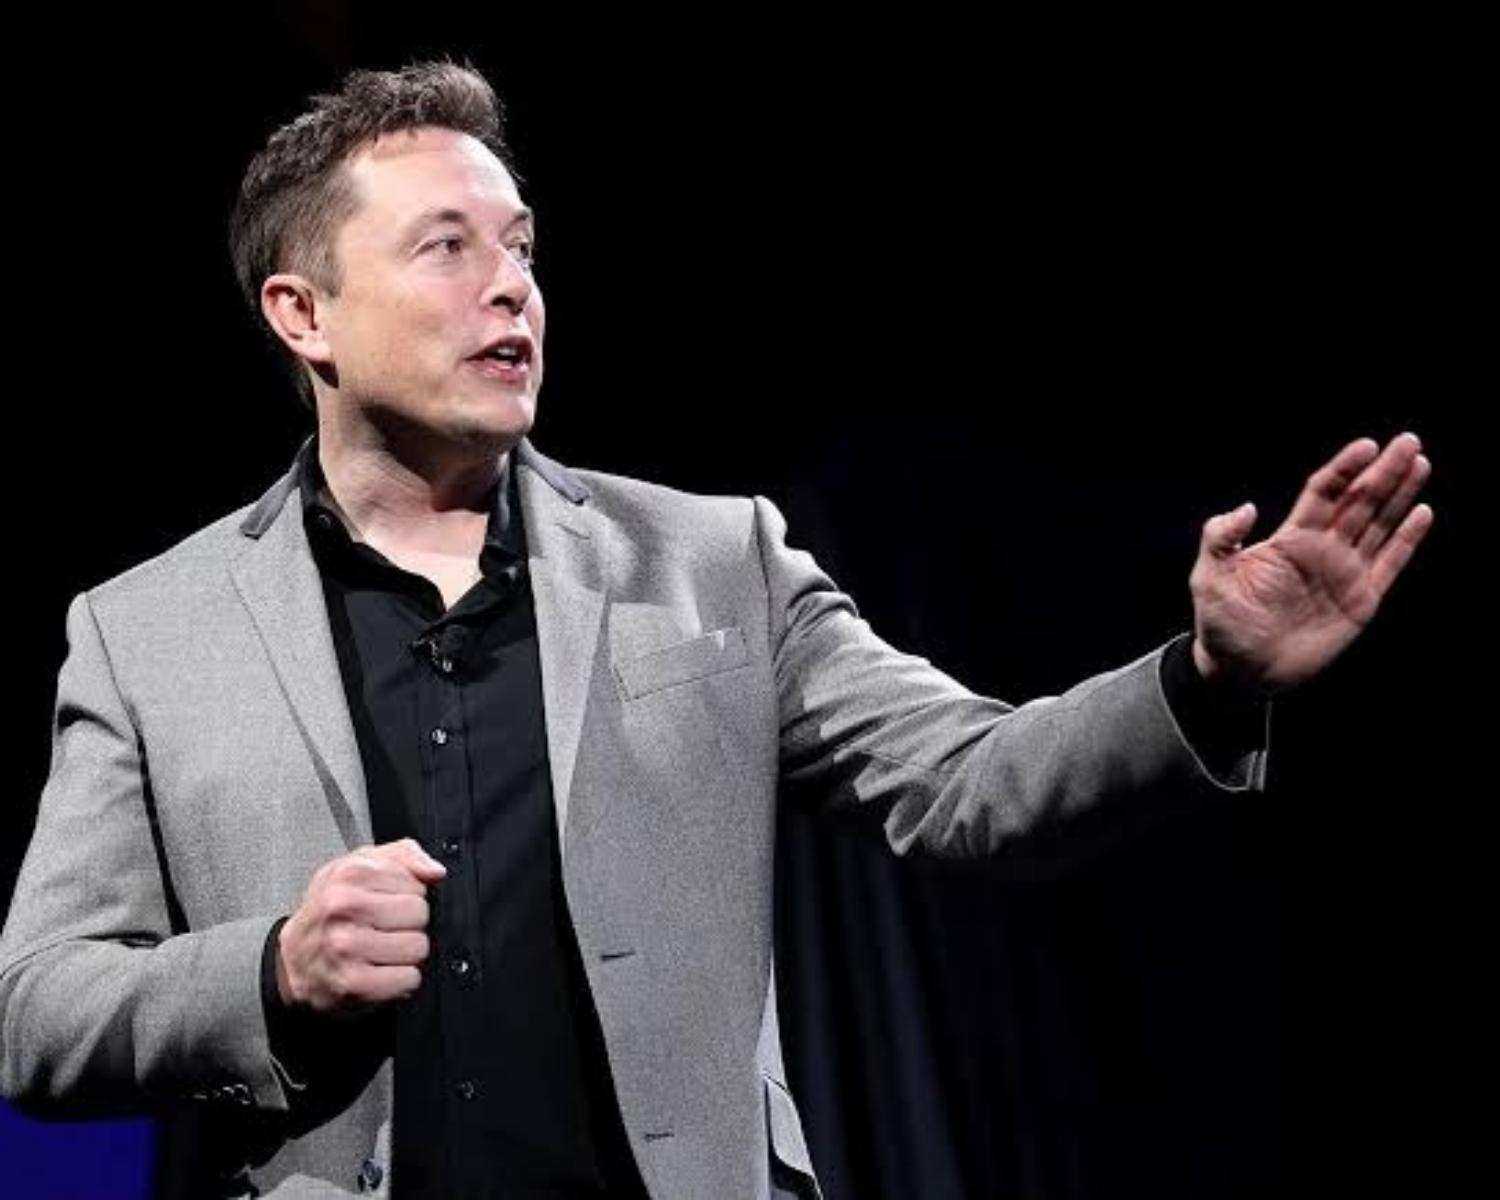 5 pieces of Advice From Elon Musk